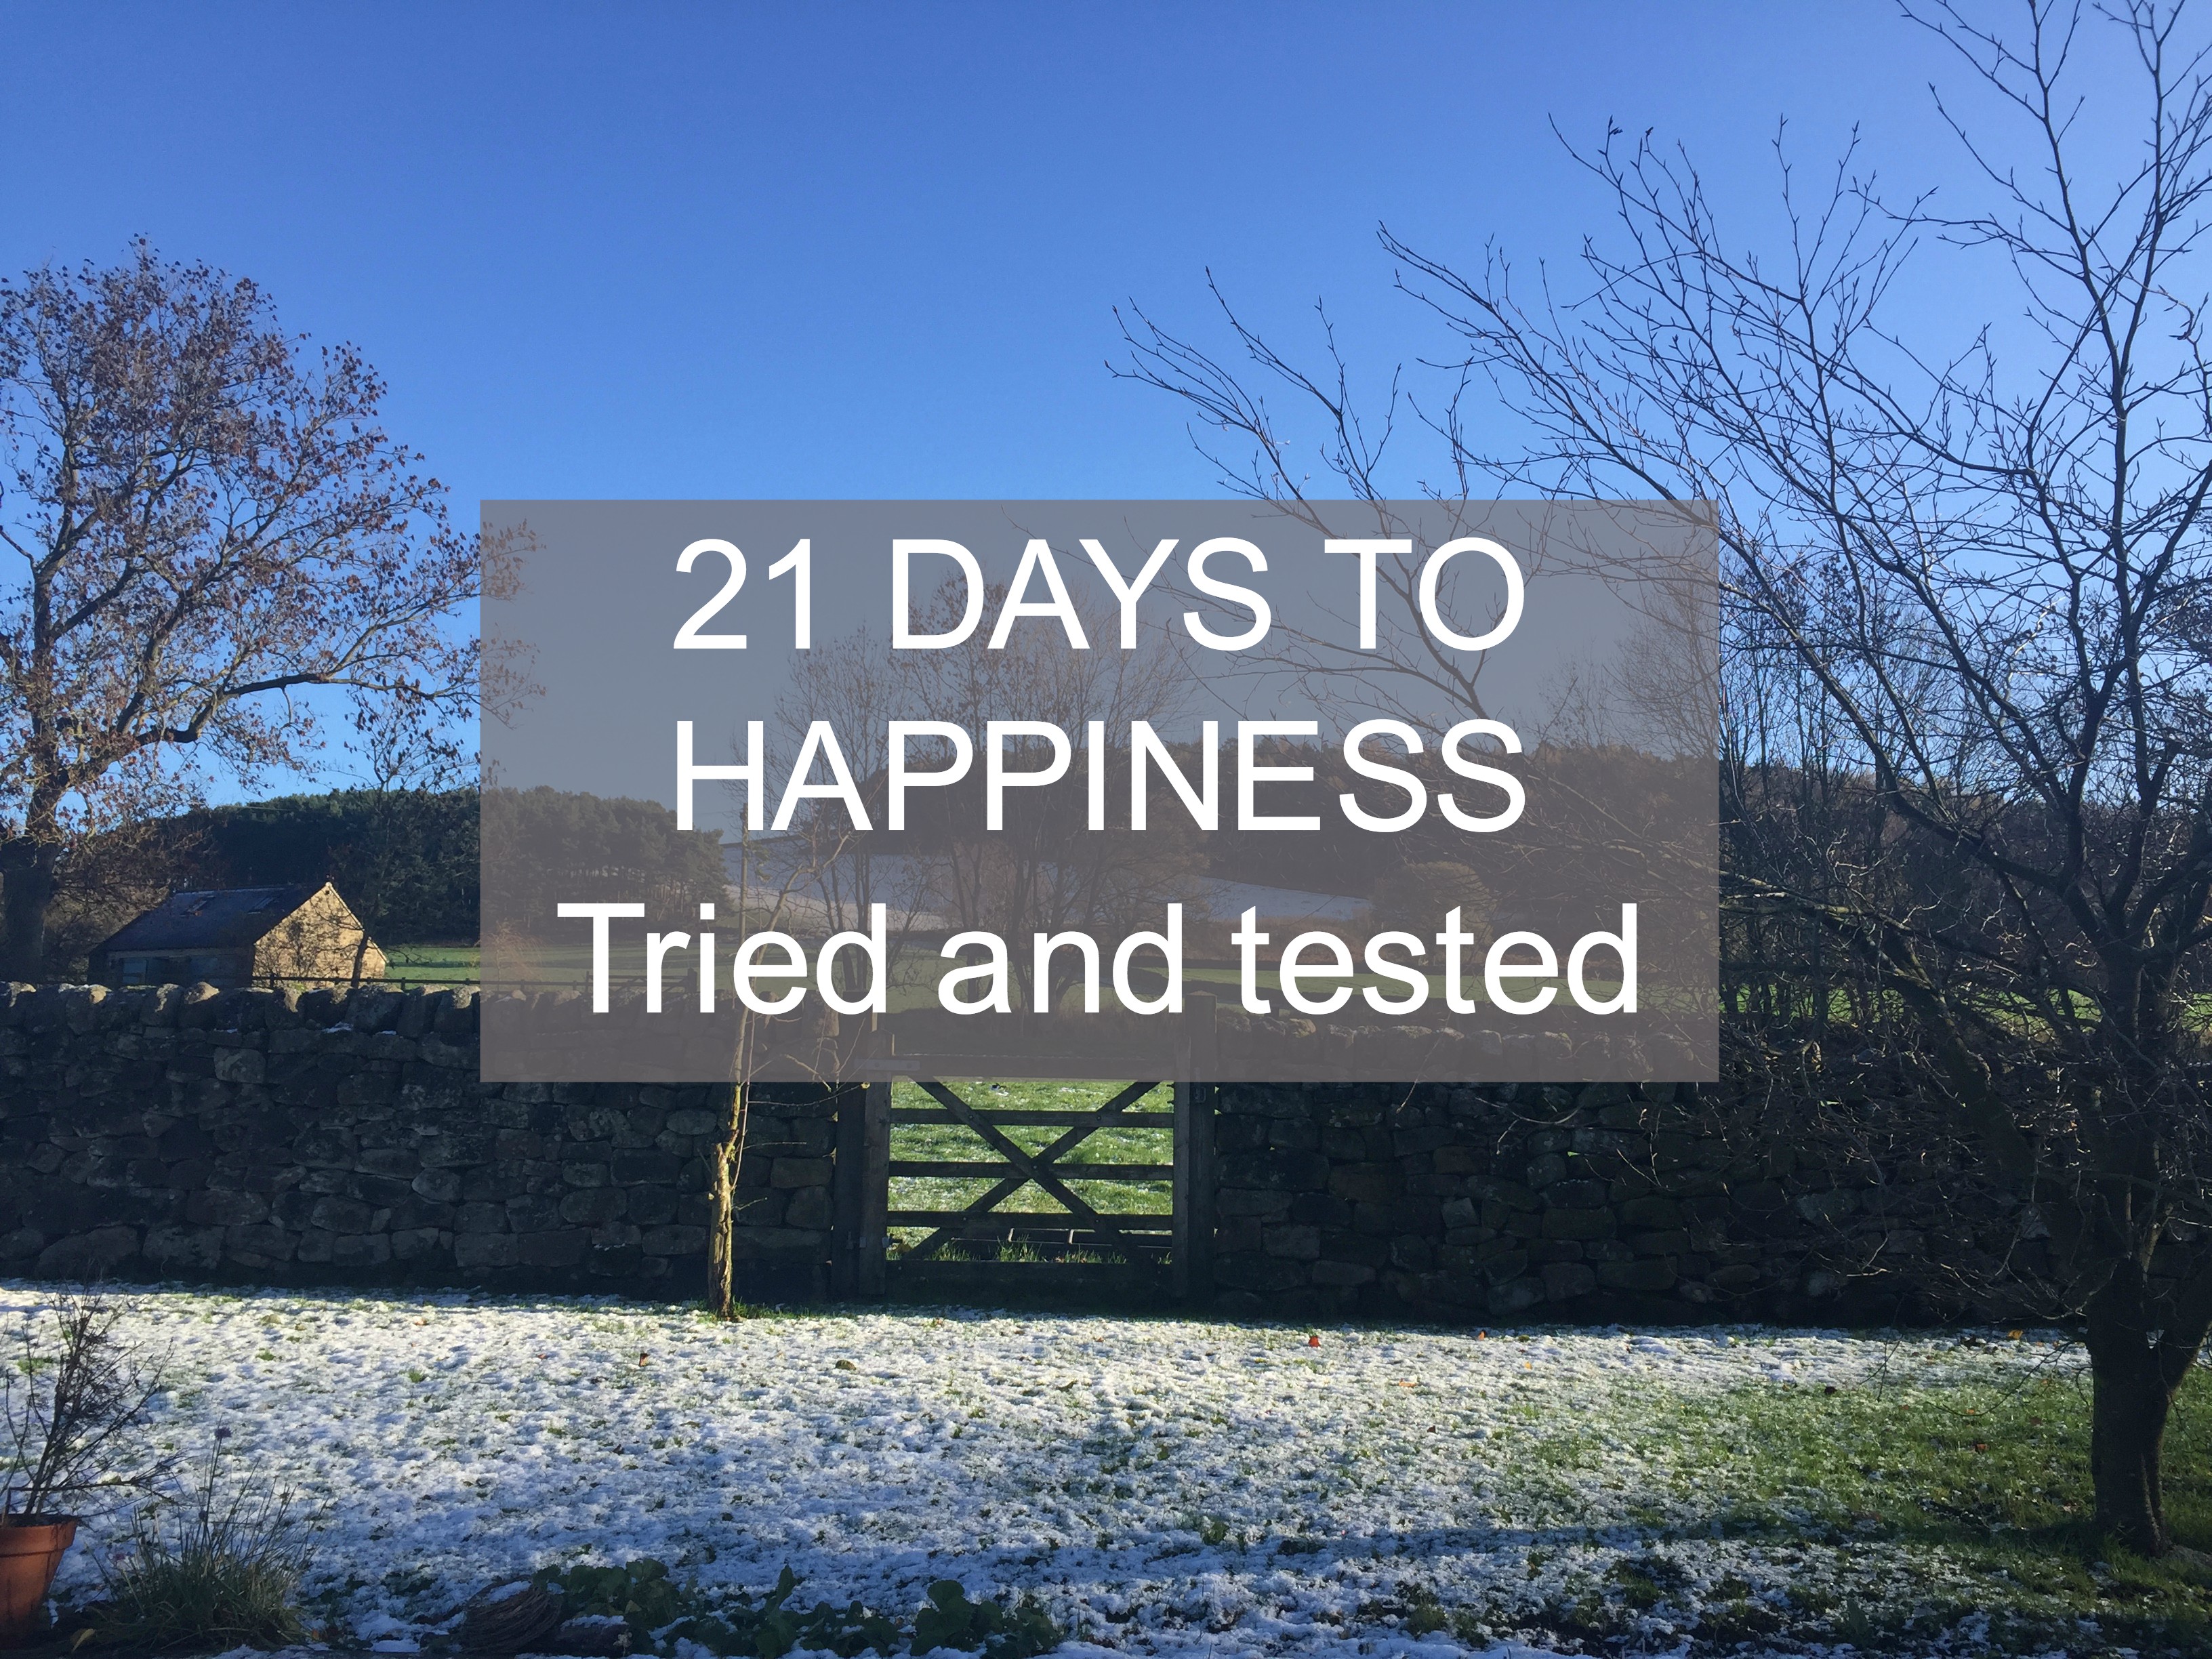 21 Days to Happiness – Tried and tested